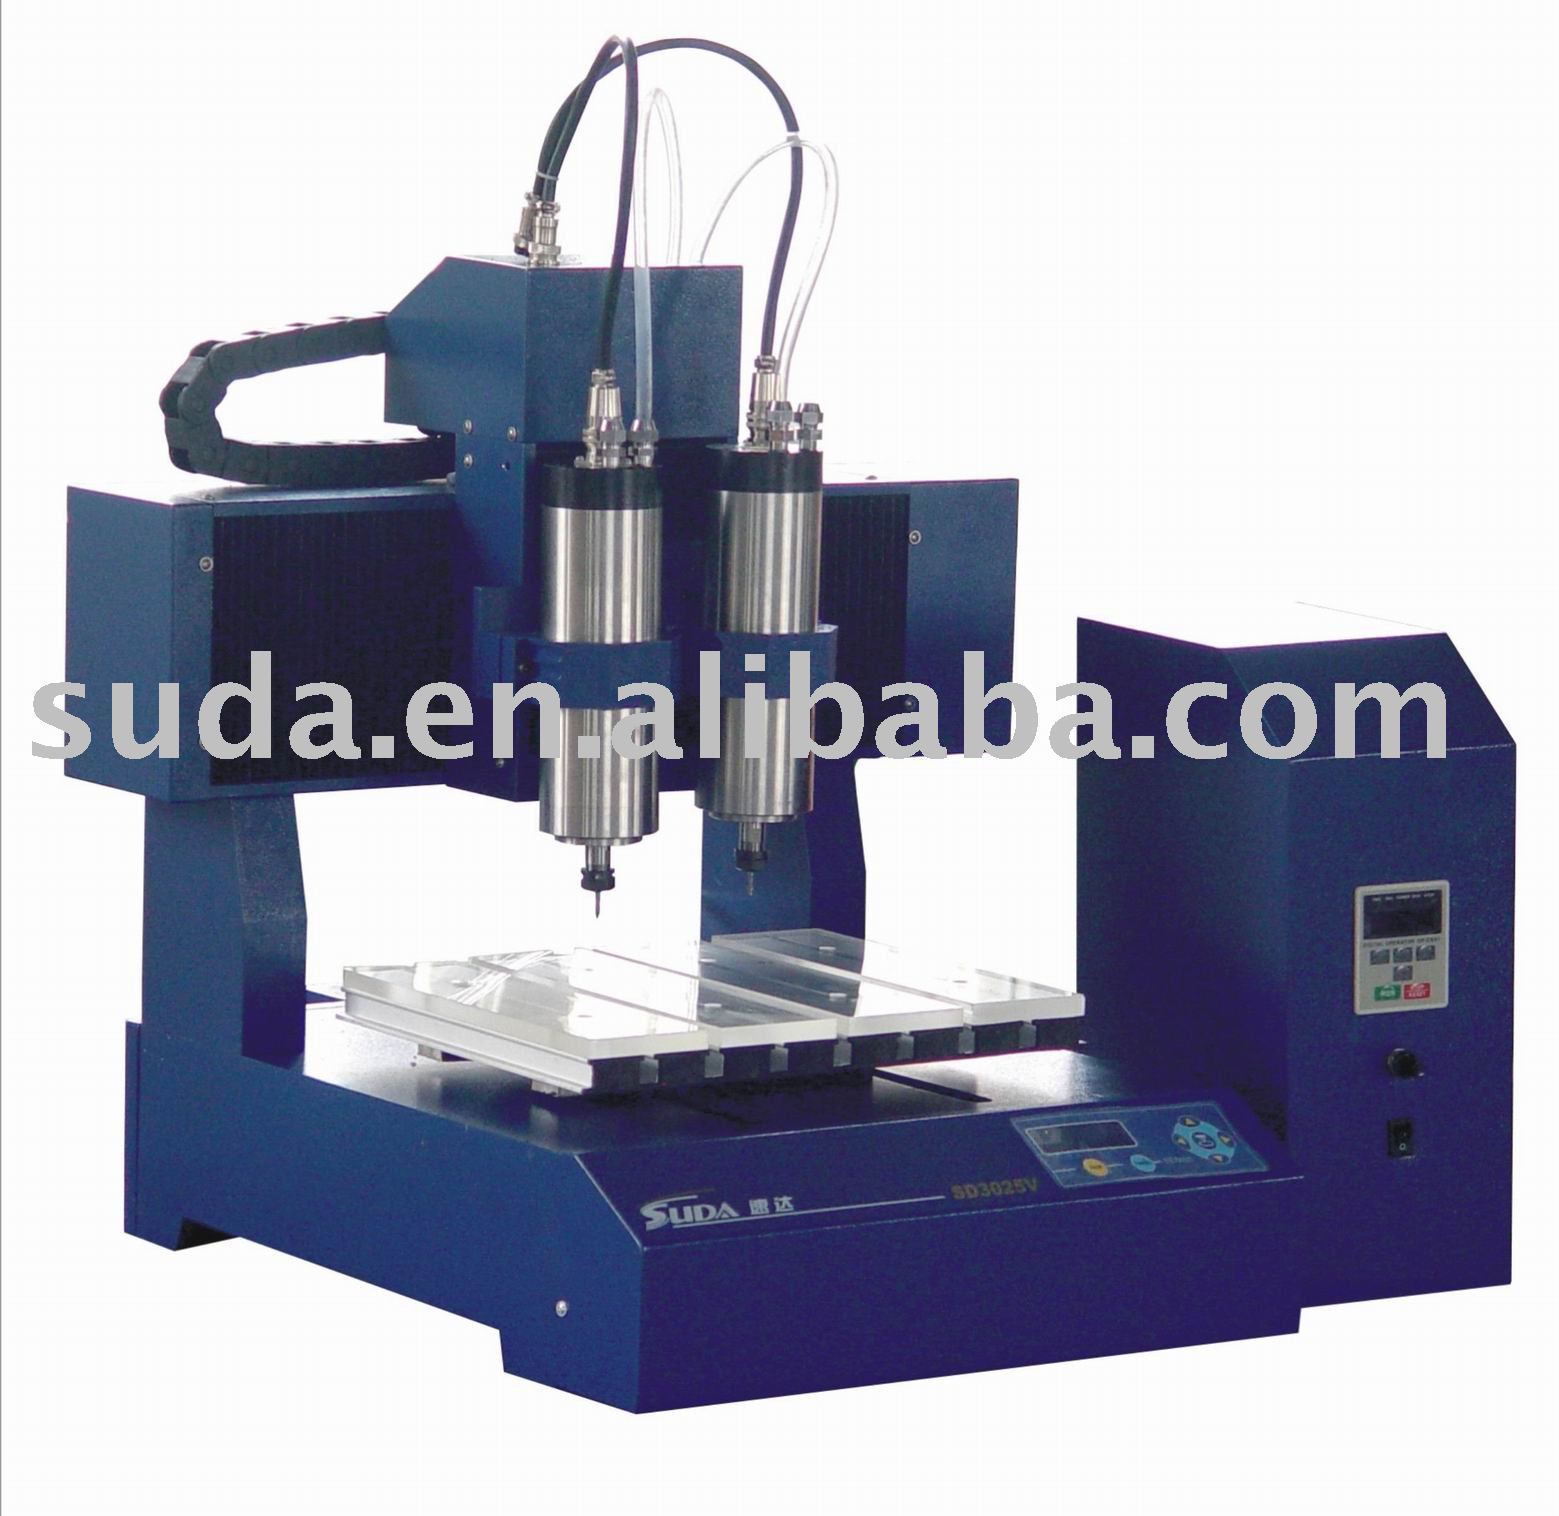 SUDA SMALL CNC ROUTER /CNC ENGAVER/ CNC CUTTER WITH TWO SPINDLE MOTOR 3d cnc control ---SD3025V